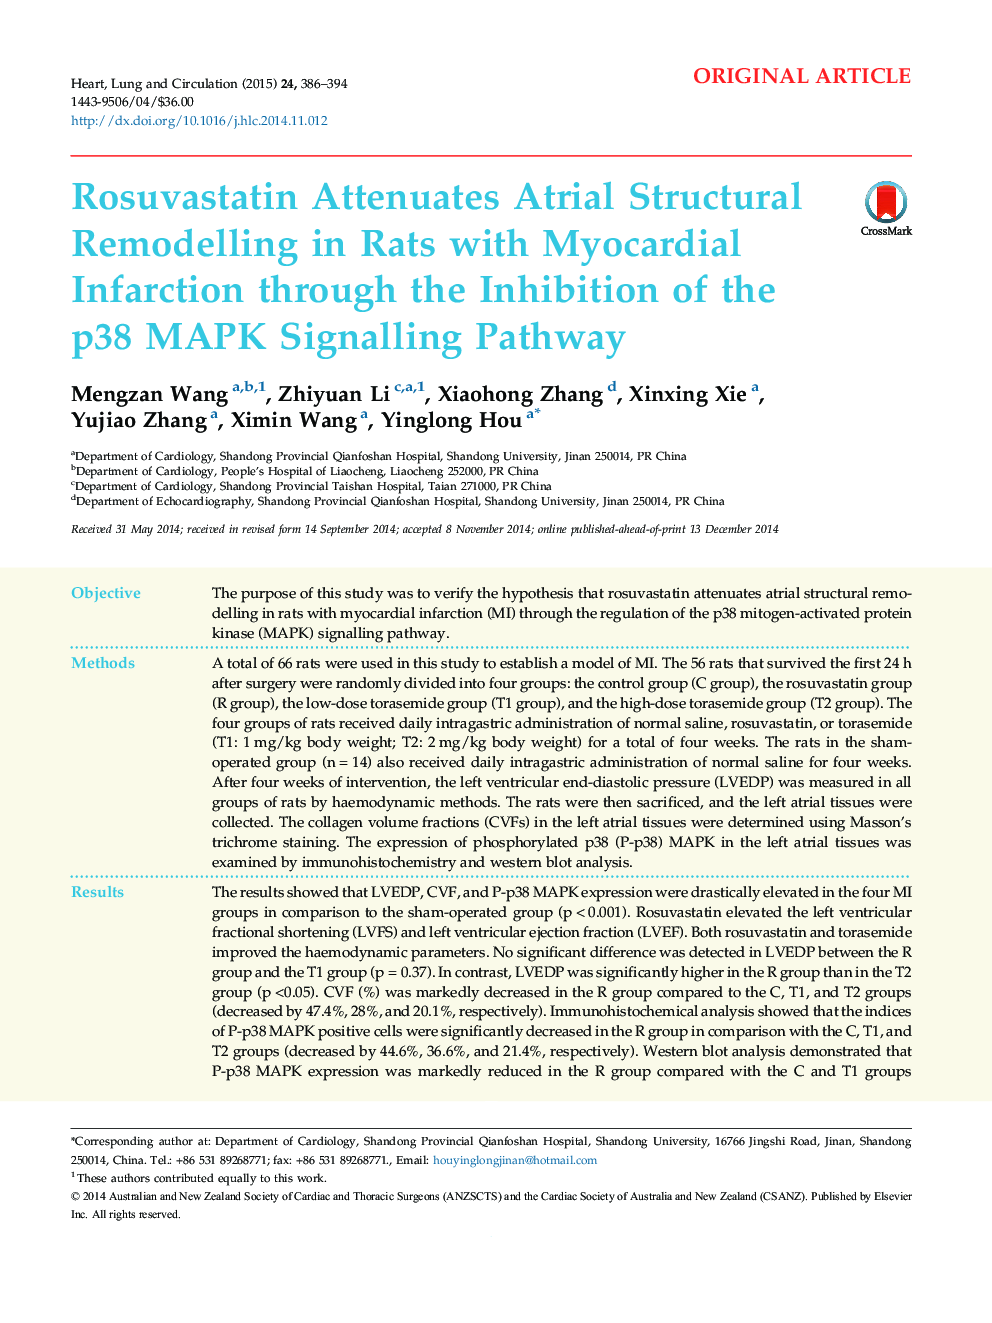 Rosuvastatin Attenuates Atrial Structural Remodelling in Rats with Myocardial Infarction through the Inhibition of the p38 MAPK Signalling Pathway